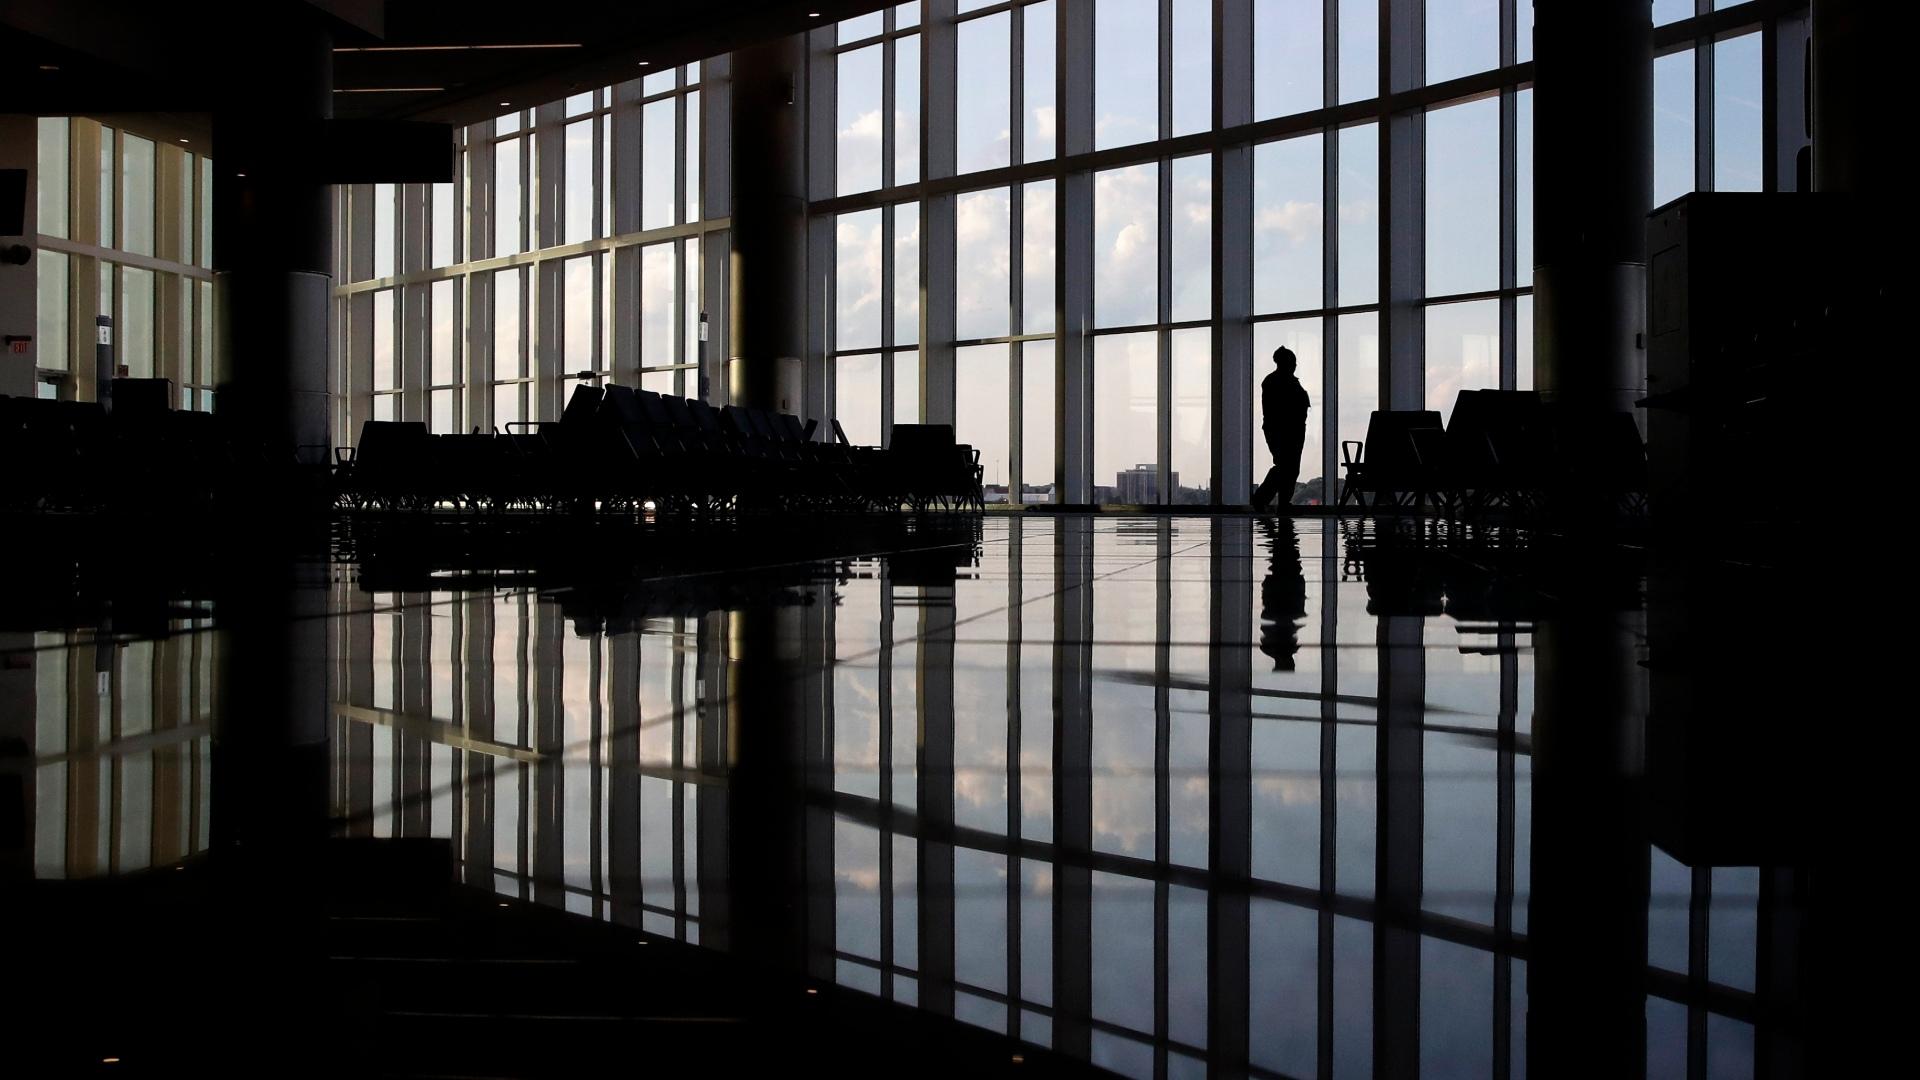 In this Monday, June 1, 2020 file photo, a woman looks through a window at a near-empty terminal at an airport in Atlanta. (AP Photo / Charlie Riedel)